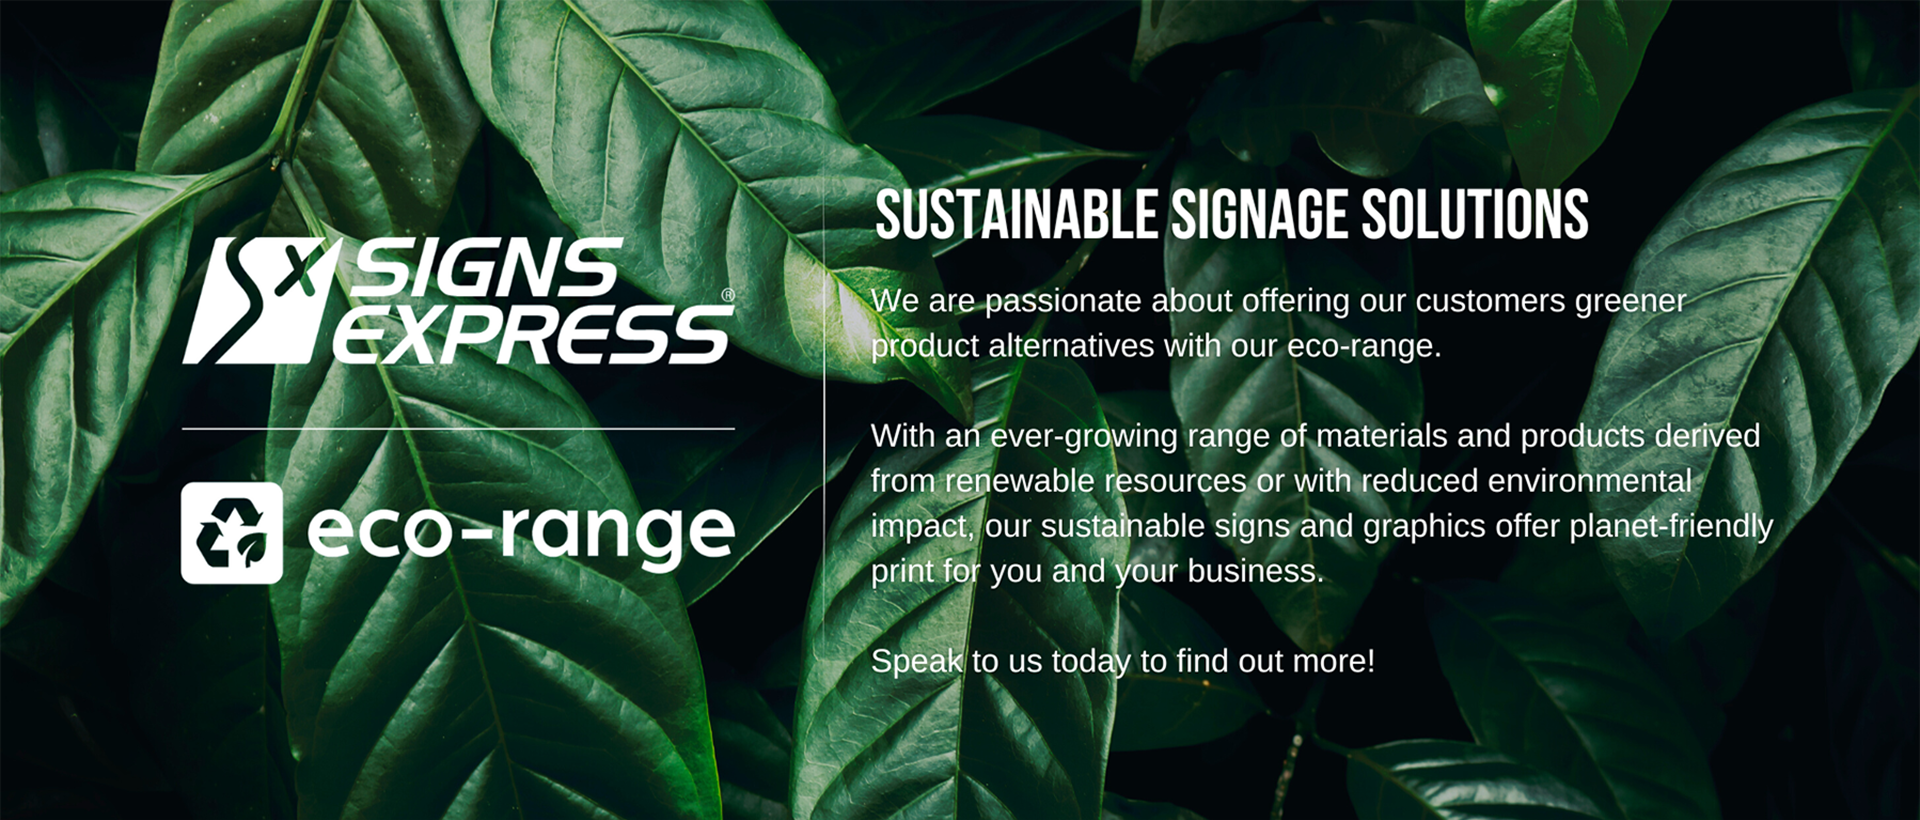 Website Sustainable Signage Solutions